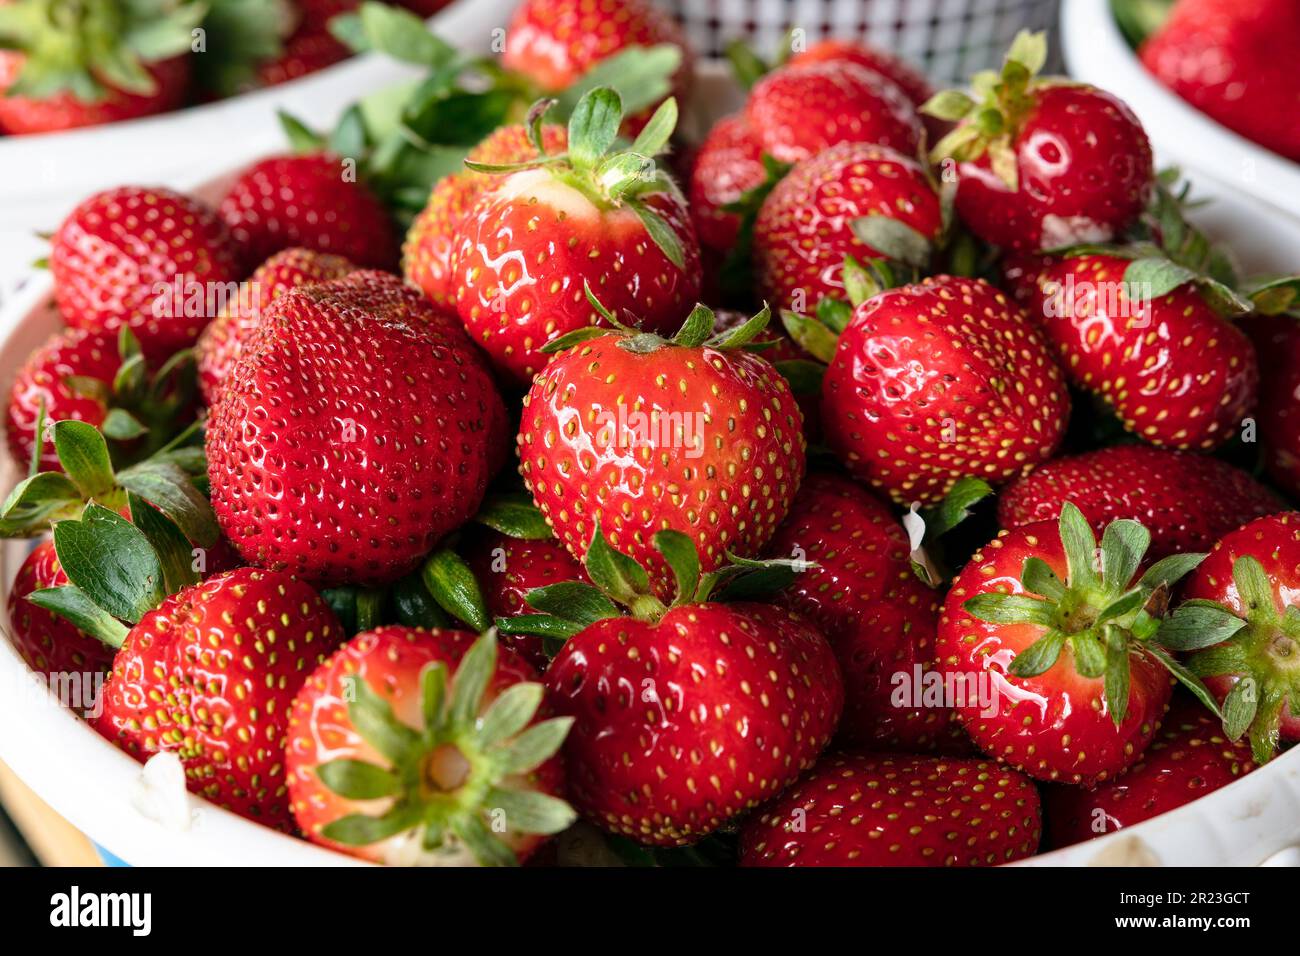 Freshly picked strawberries (Fragaria ananassa) in a white plastic basket at a farmer's market. Stock Photo